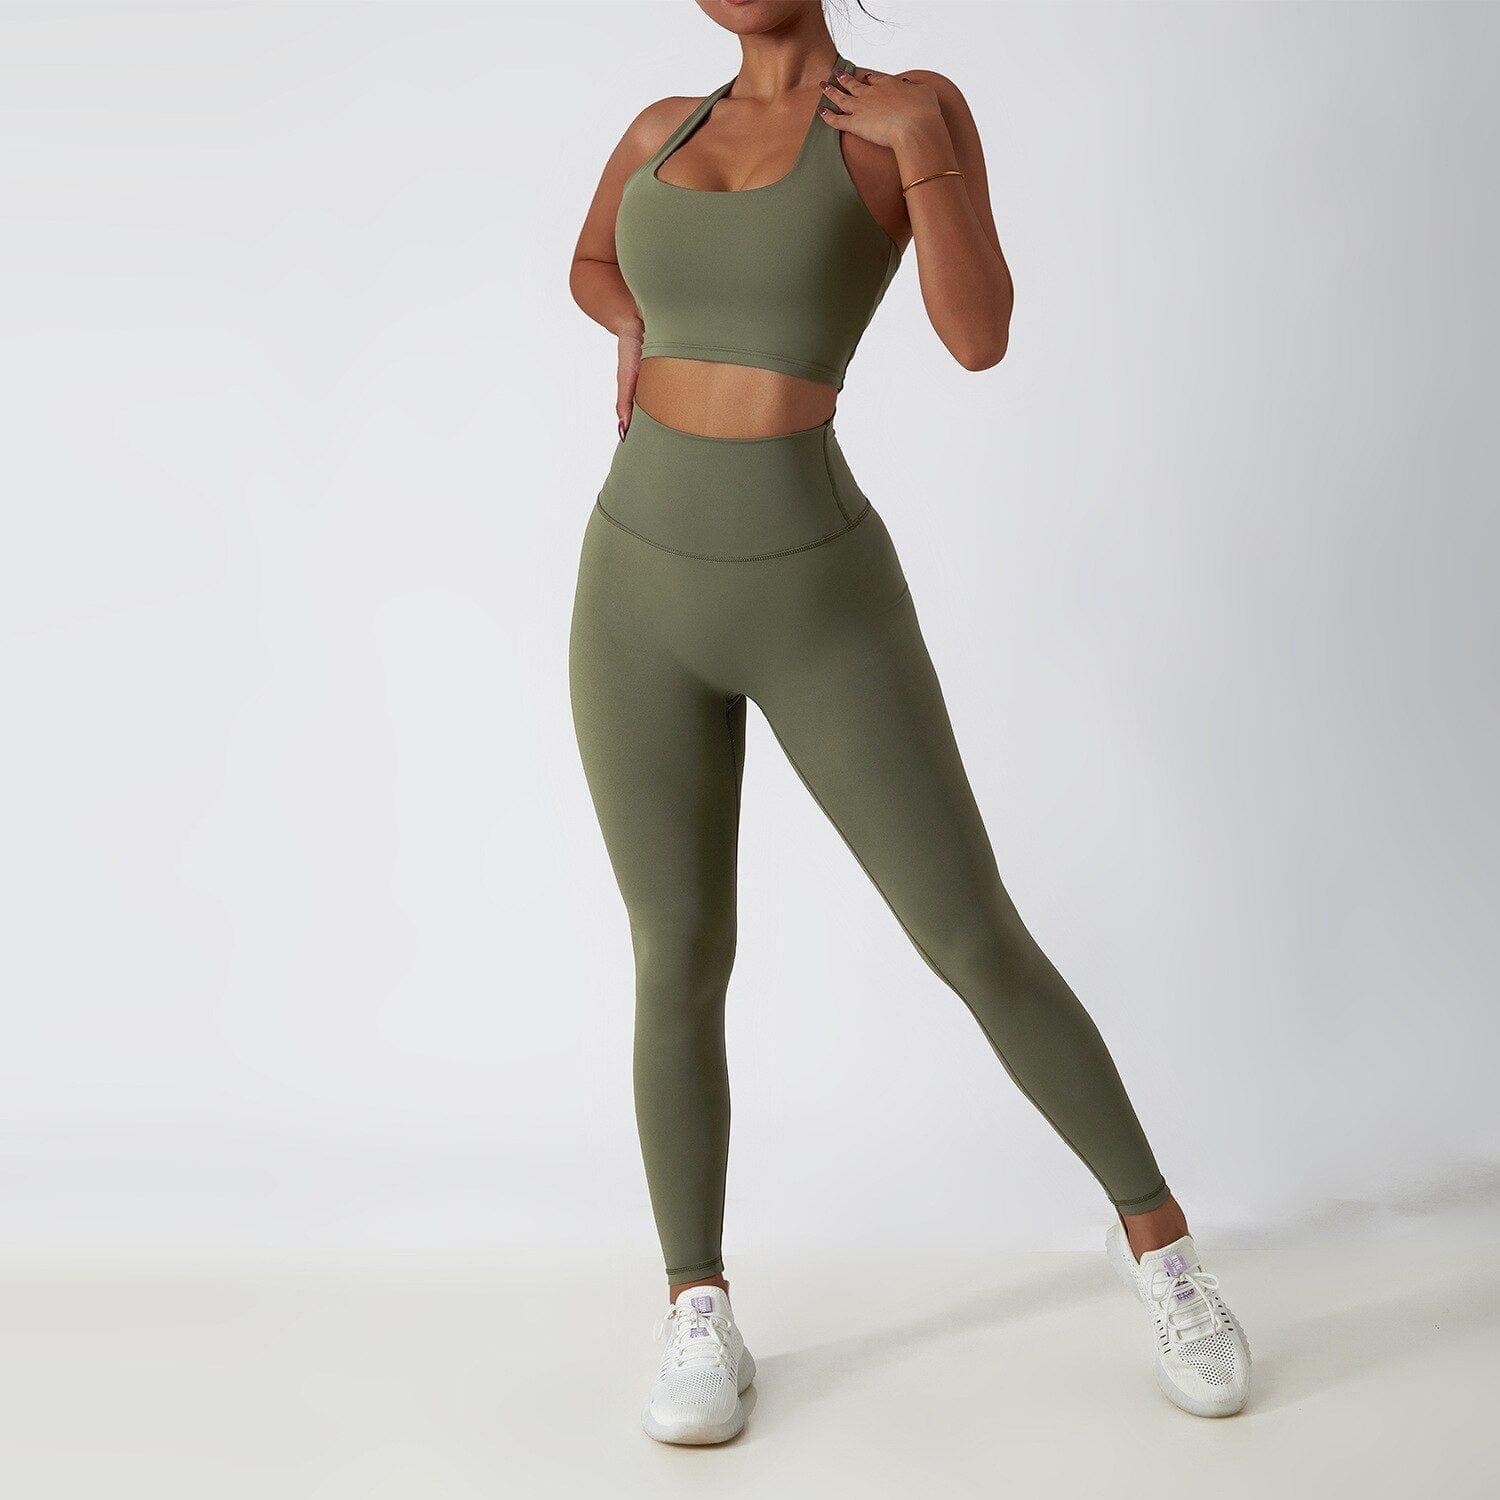 Shop 0 army green bra set / S / China 2 Piece Yoga Suits Yoga Clothes Women High Waist Leggings Zipper Long Sleeves Gym Workout Fitness Clothes Set Running Sportswear Mademoiselle Home Decor